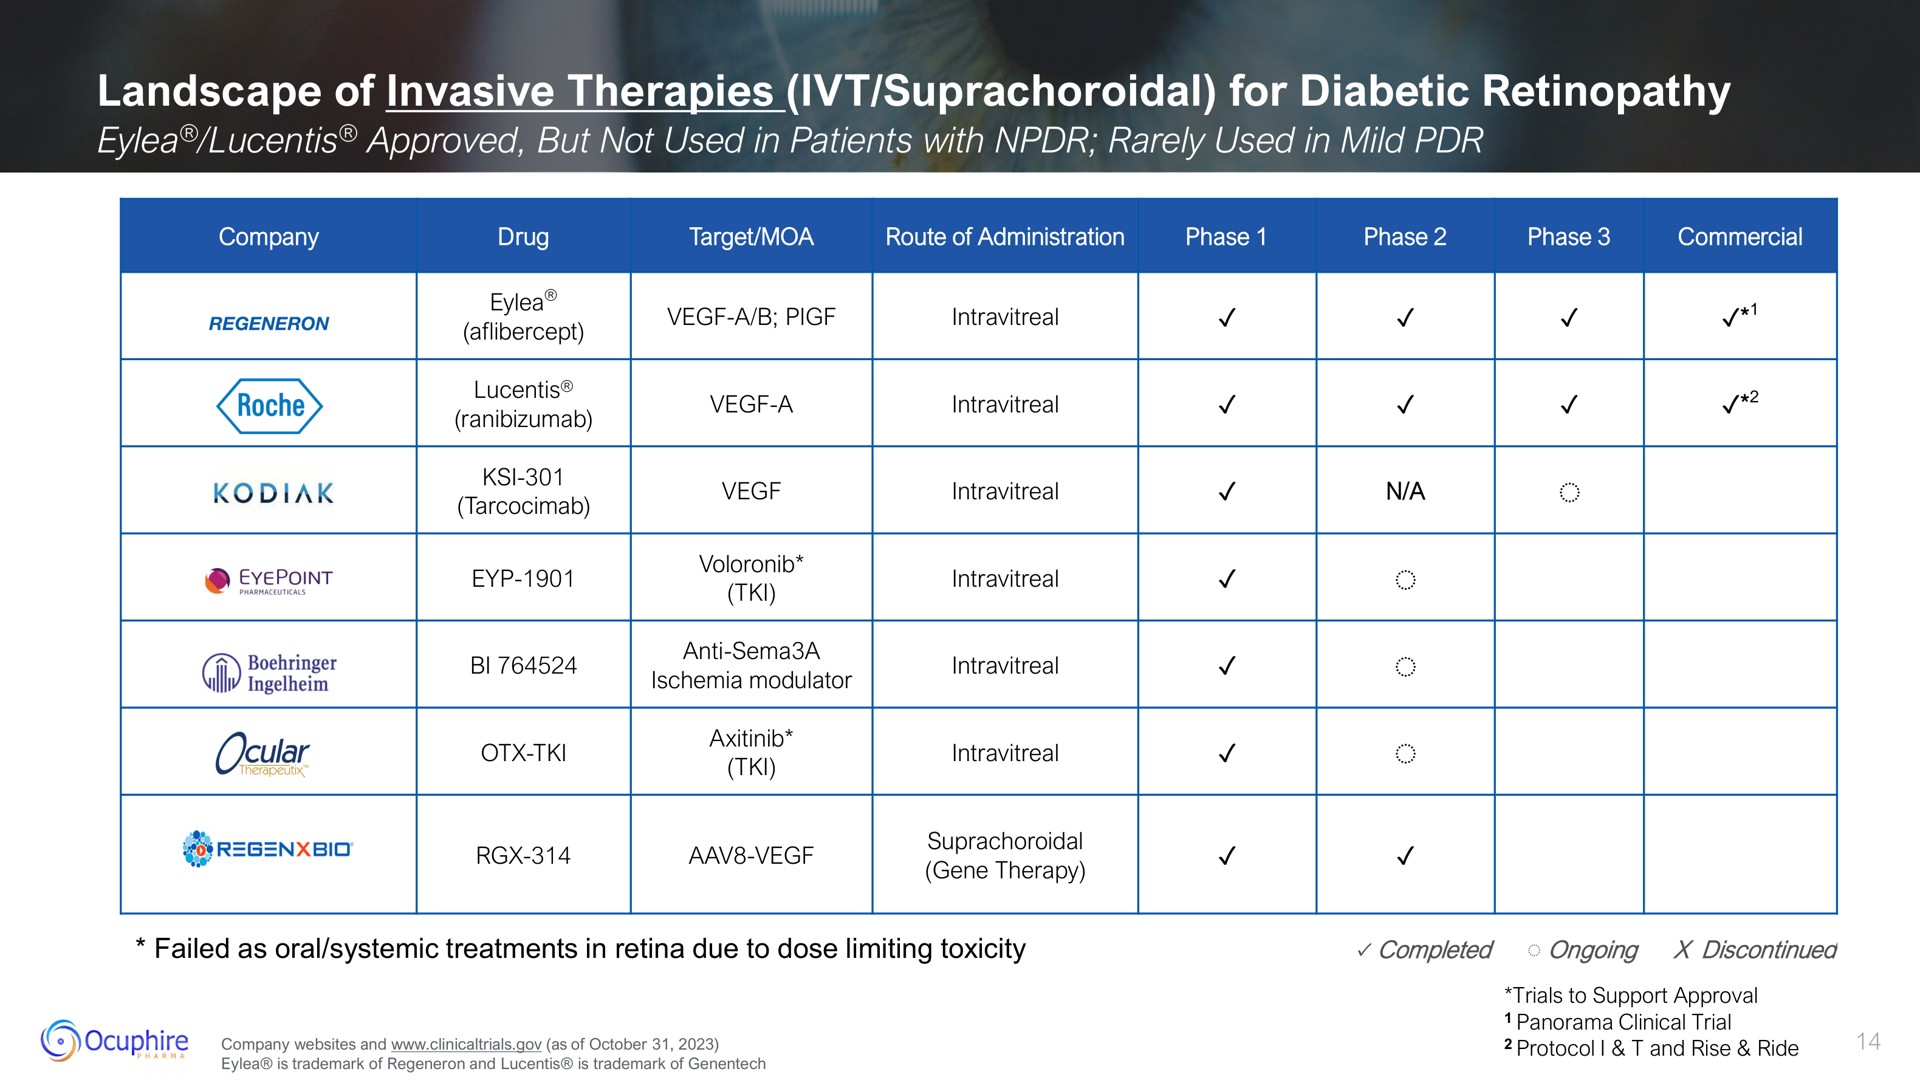 landscape of invasive therapies suprachoroidal for diabetic gone therapy | Ocuphire Pharma